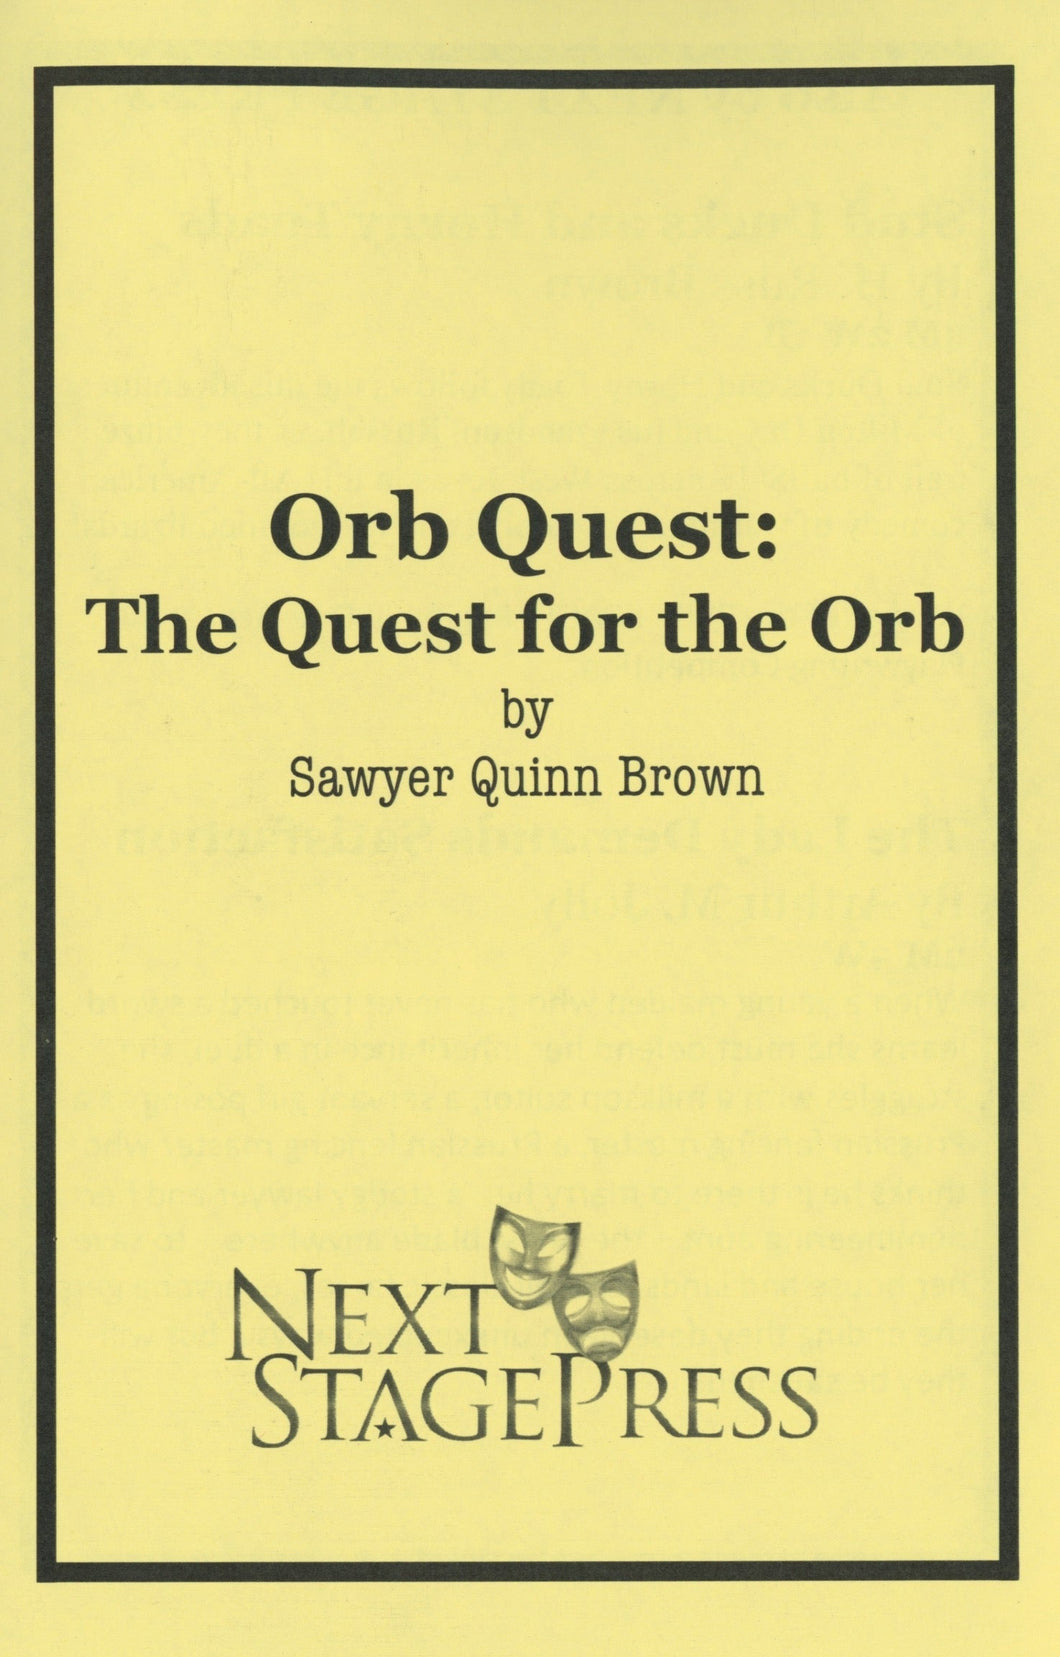 ORB QUEST: THE QUEST FOR THE ORB by Sawyer Quinn Brown - Digital Version